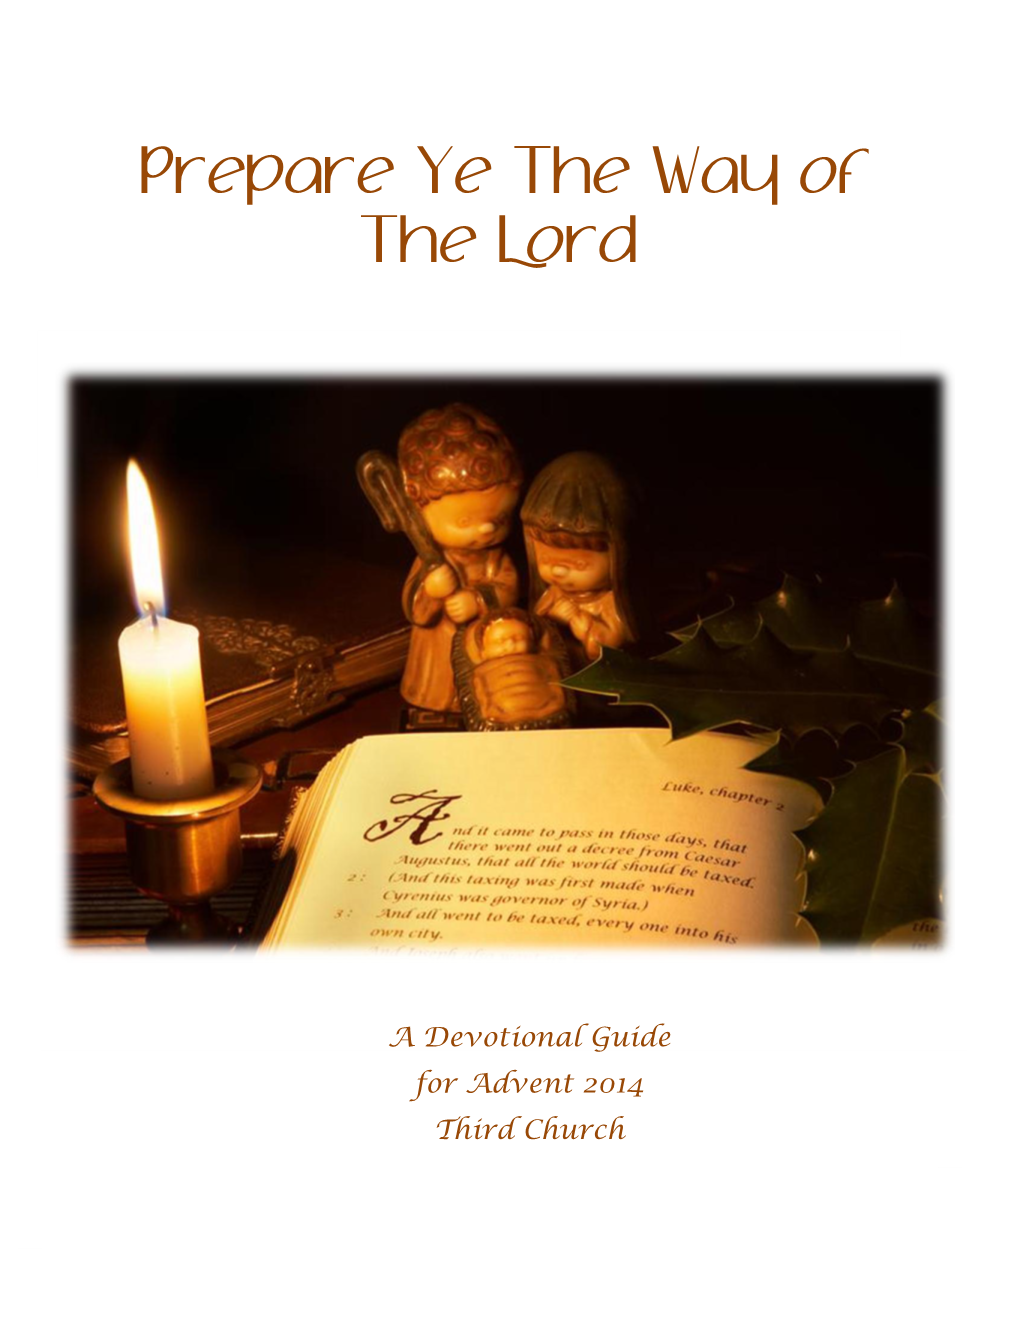 Prepare Ye the Way of the Lord